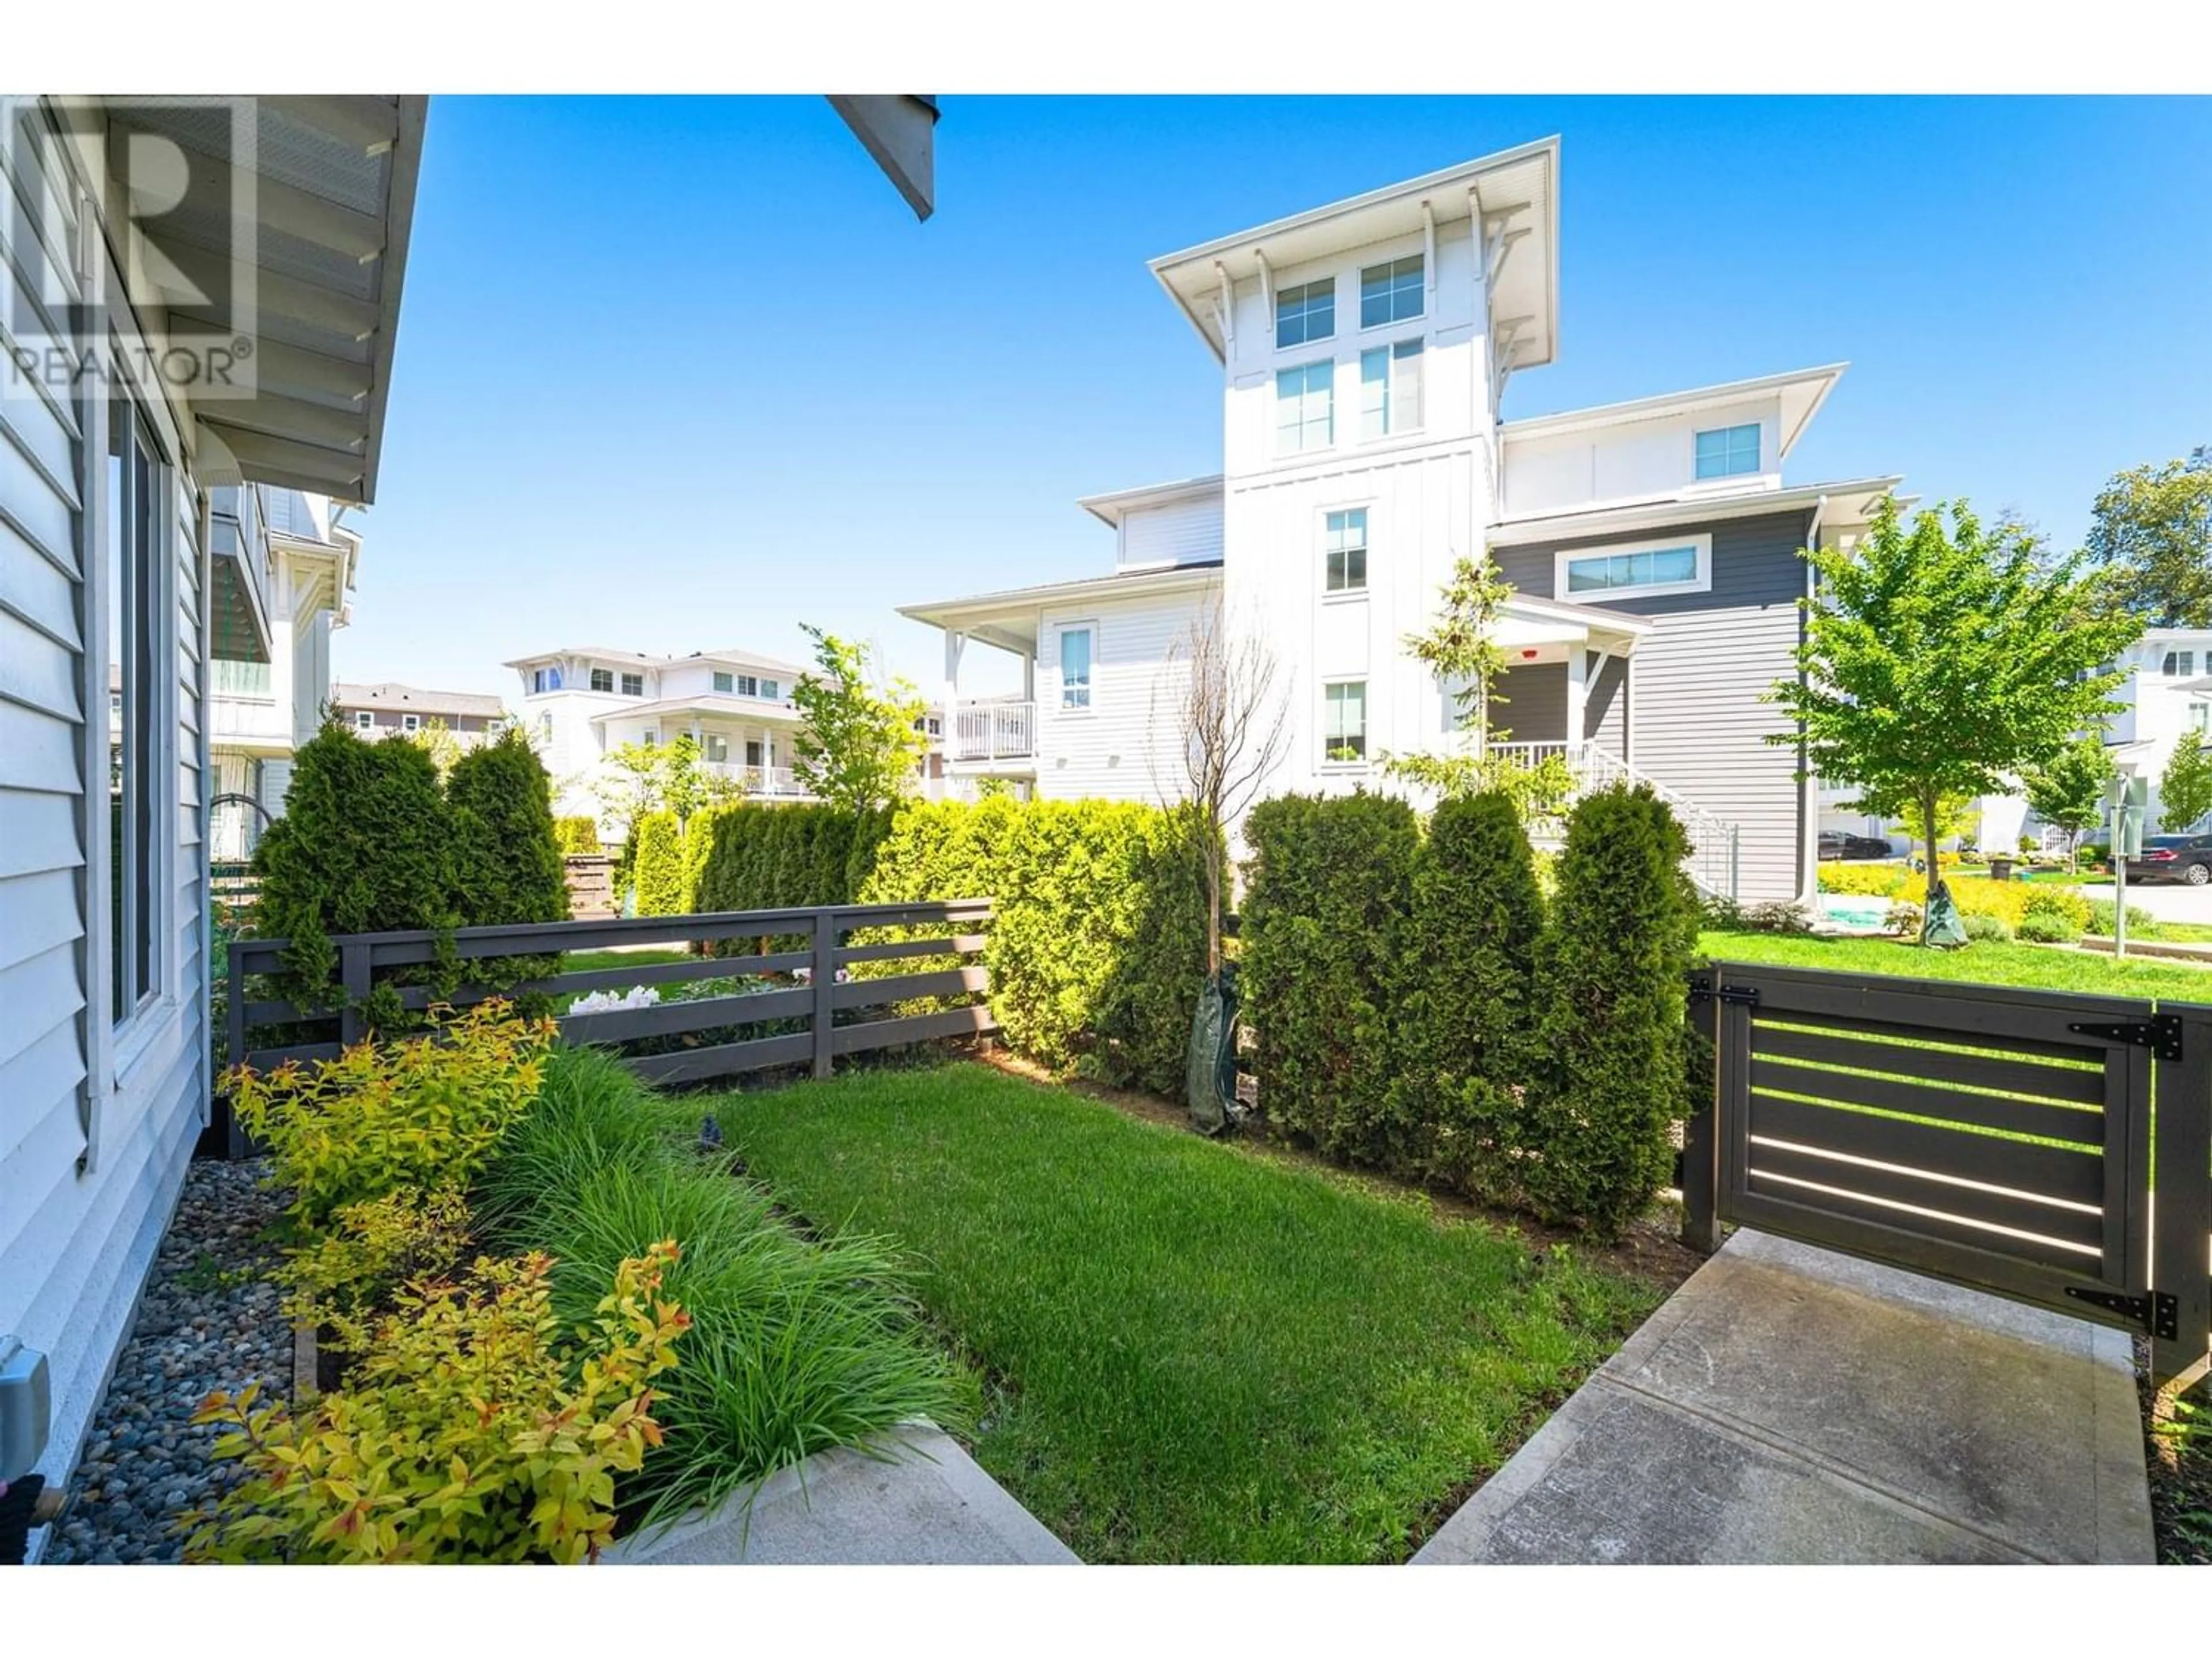 A pic from exterior of the house or condo for 88 4638 ORCA WAY, Tsawwassen British Columbia V4M0C2